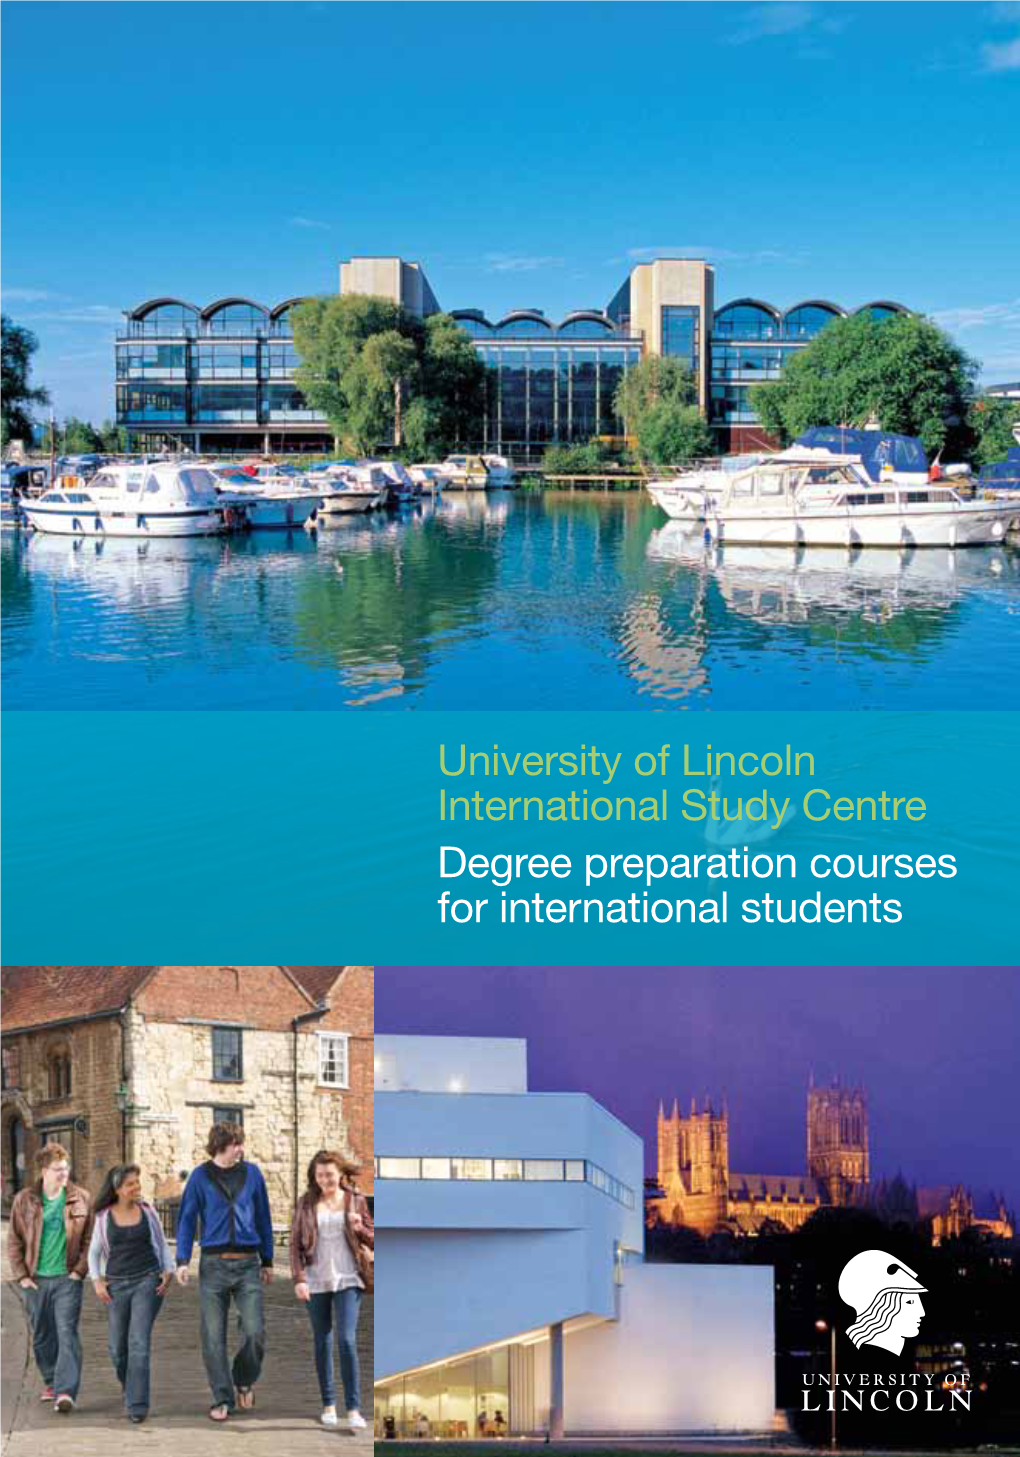 University of Lincoln International Study Centre Degree Preparation Courses for International Students Contents